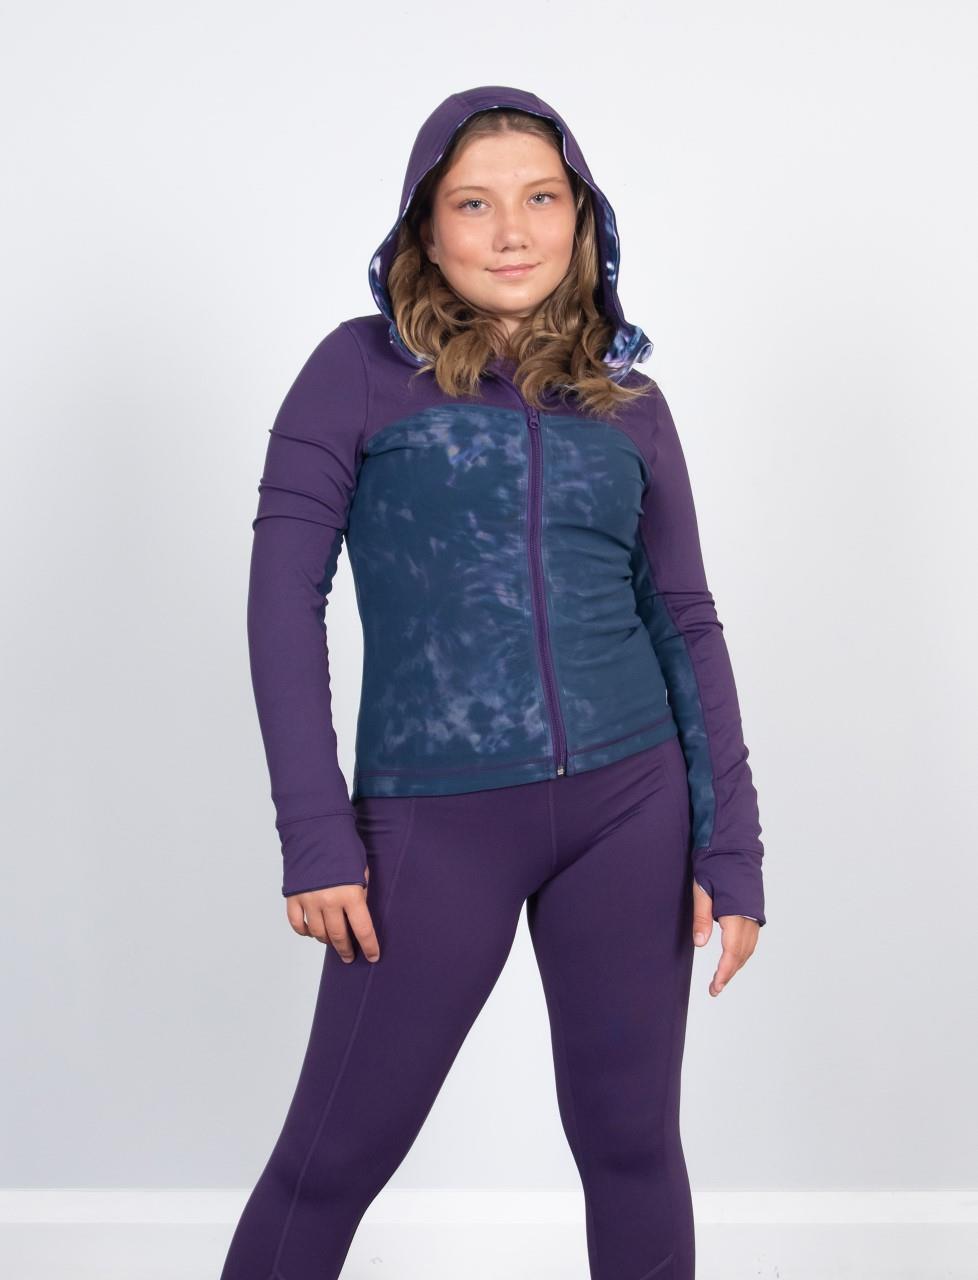 Papillion in Lilac Yoga Leggings — Cotton & Quill